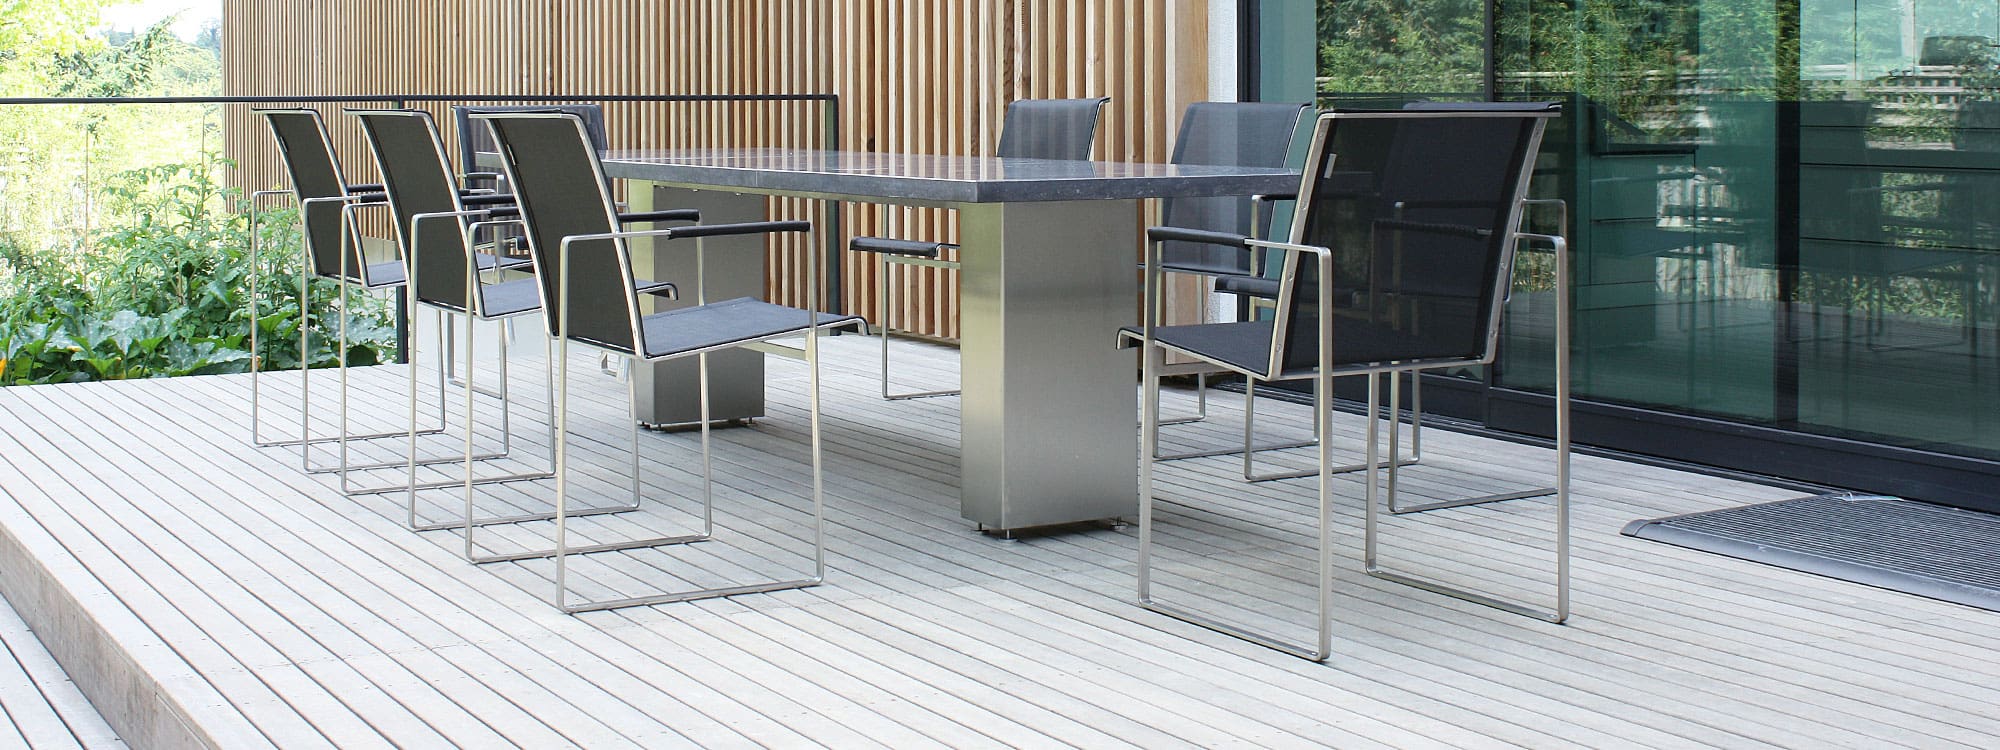 Image of London installation of FueraDentro Doble modern garden table and Sillon minimalist outdoor chairs